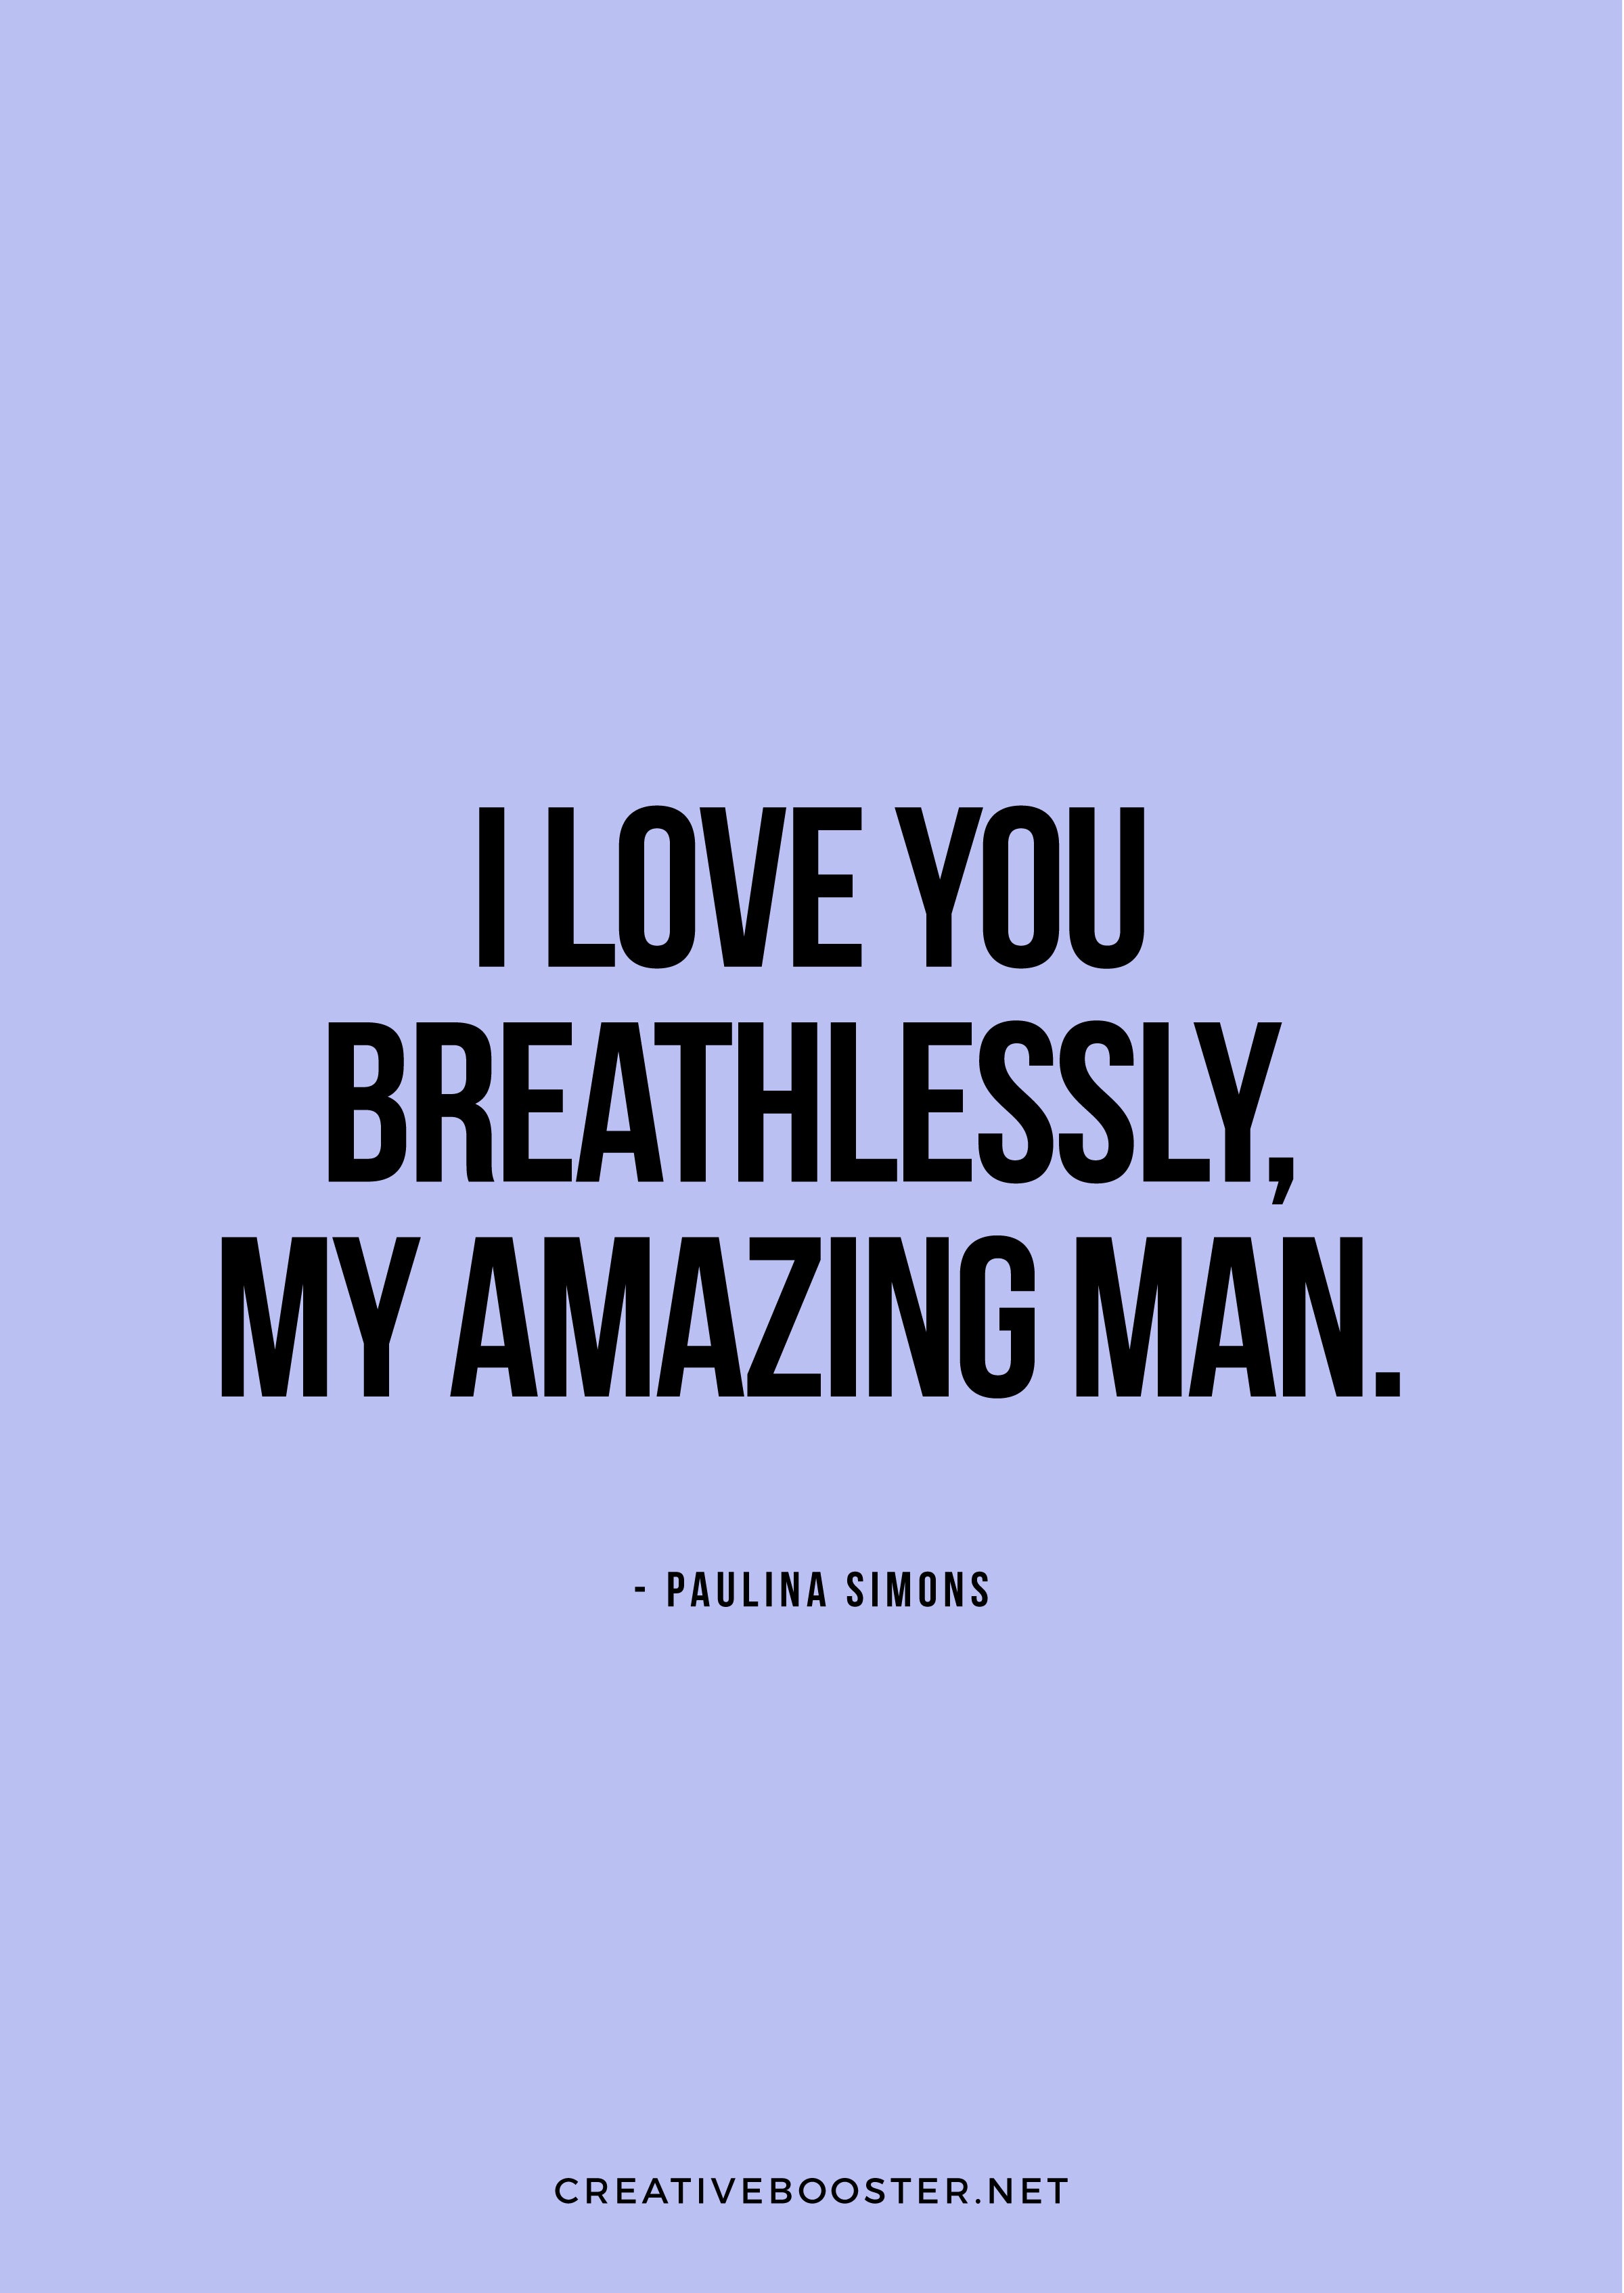 You-Are-Amazing-Quotes-For-Him---“I-love-you-breathlessly,-my-amazing-man.”-—-Paulina-Simons-(Quote-Art-Print)